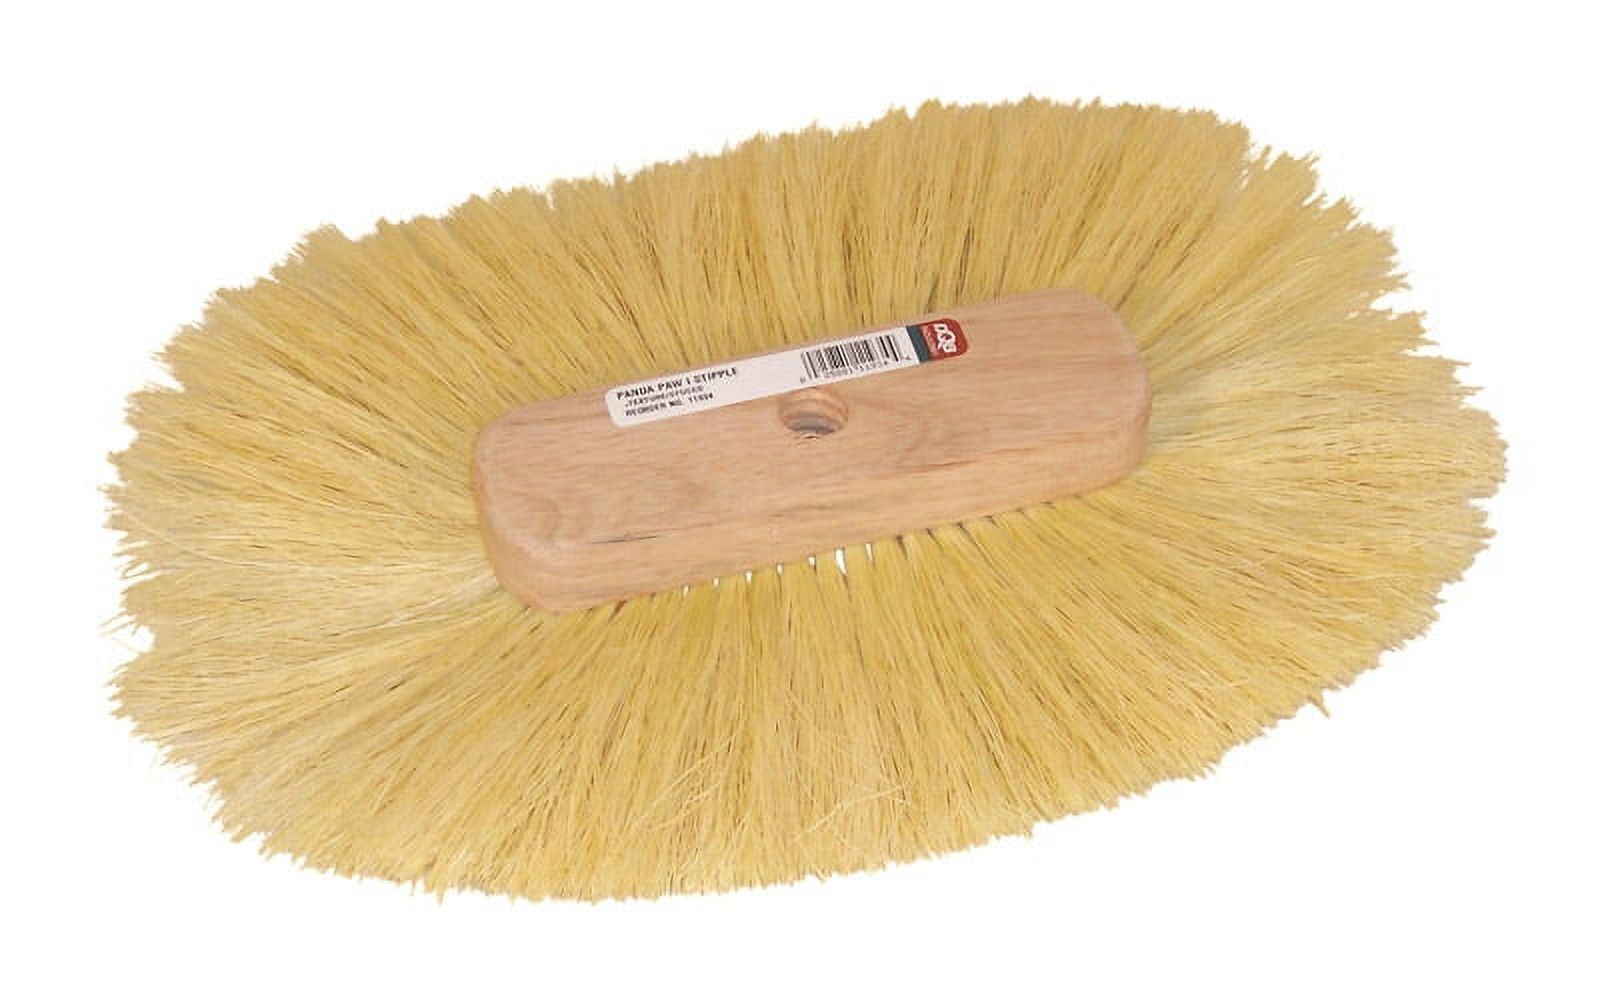 ZCFZJW Multifunctional Gap Cleaning Brush, Small Crevice Cleaning